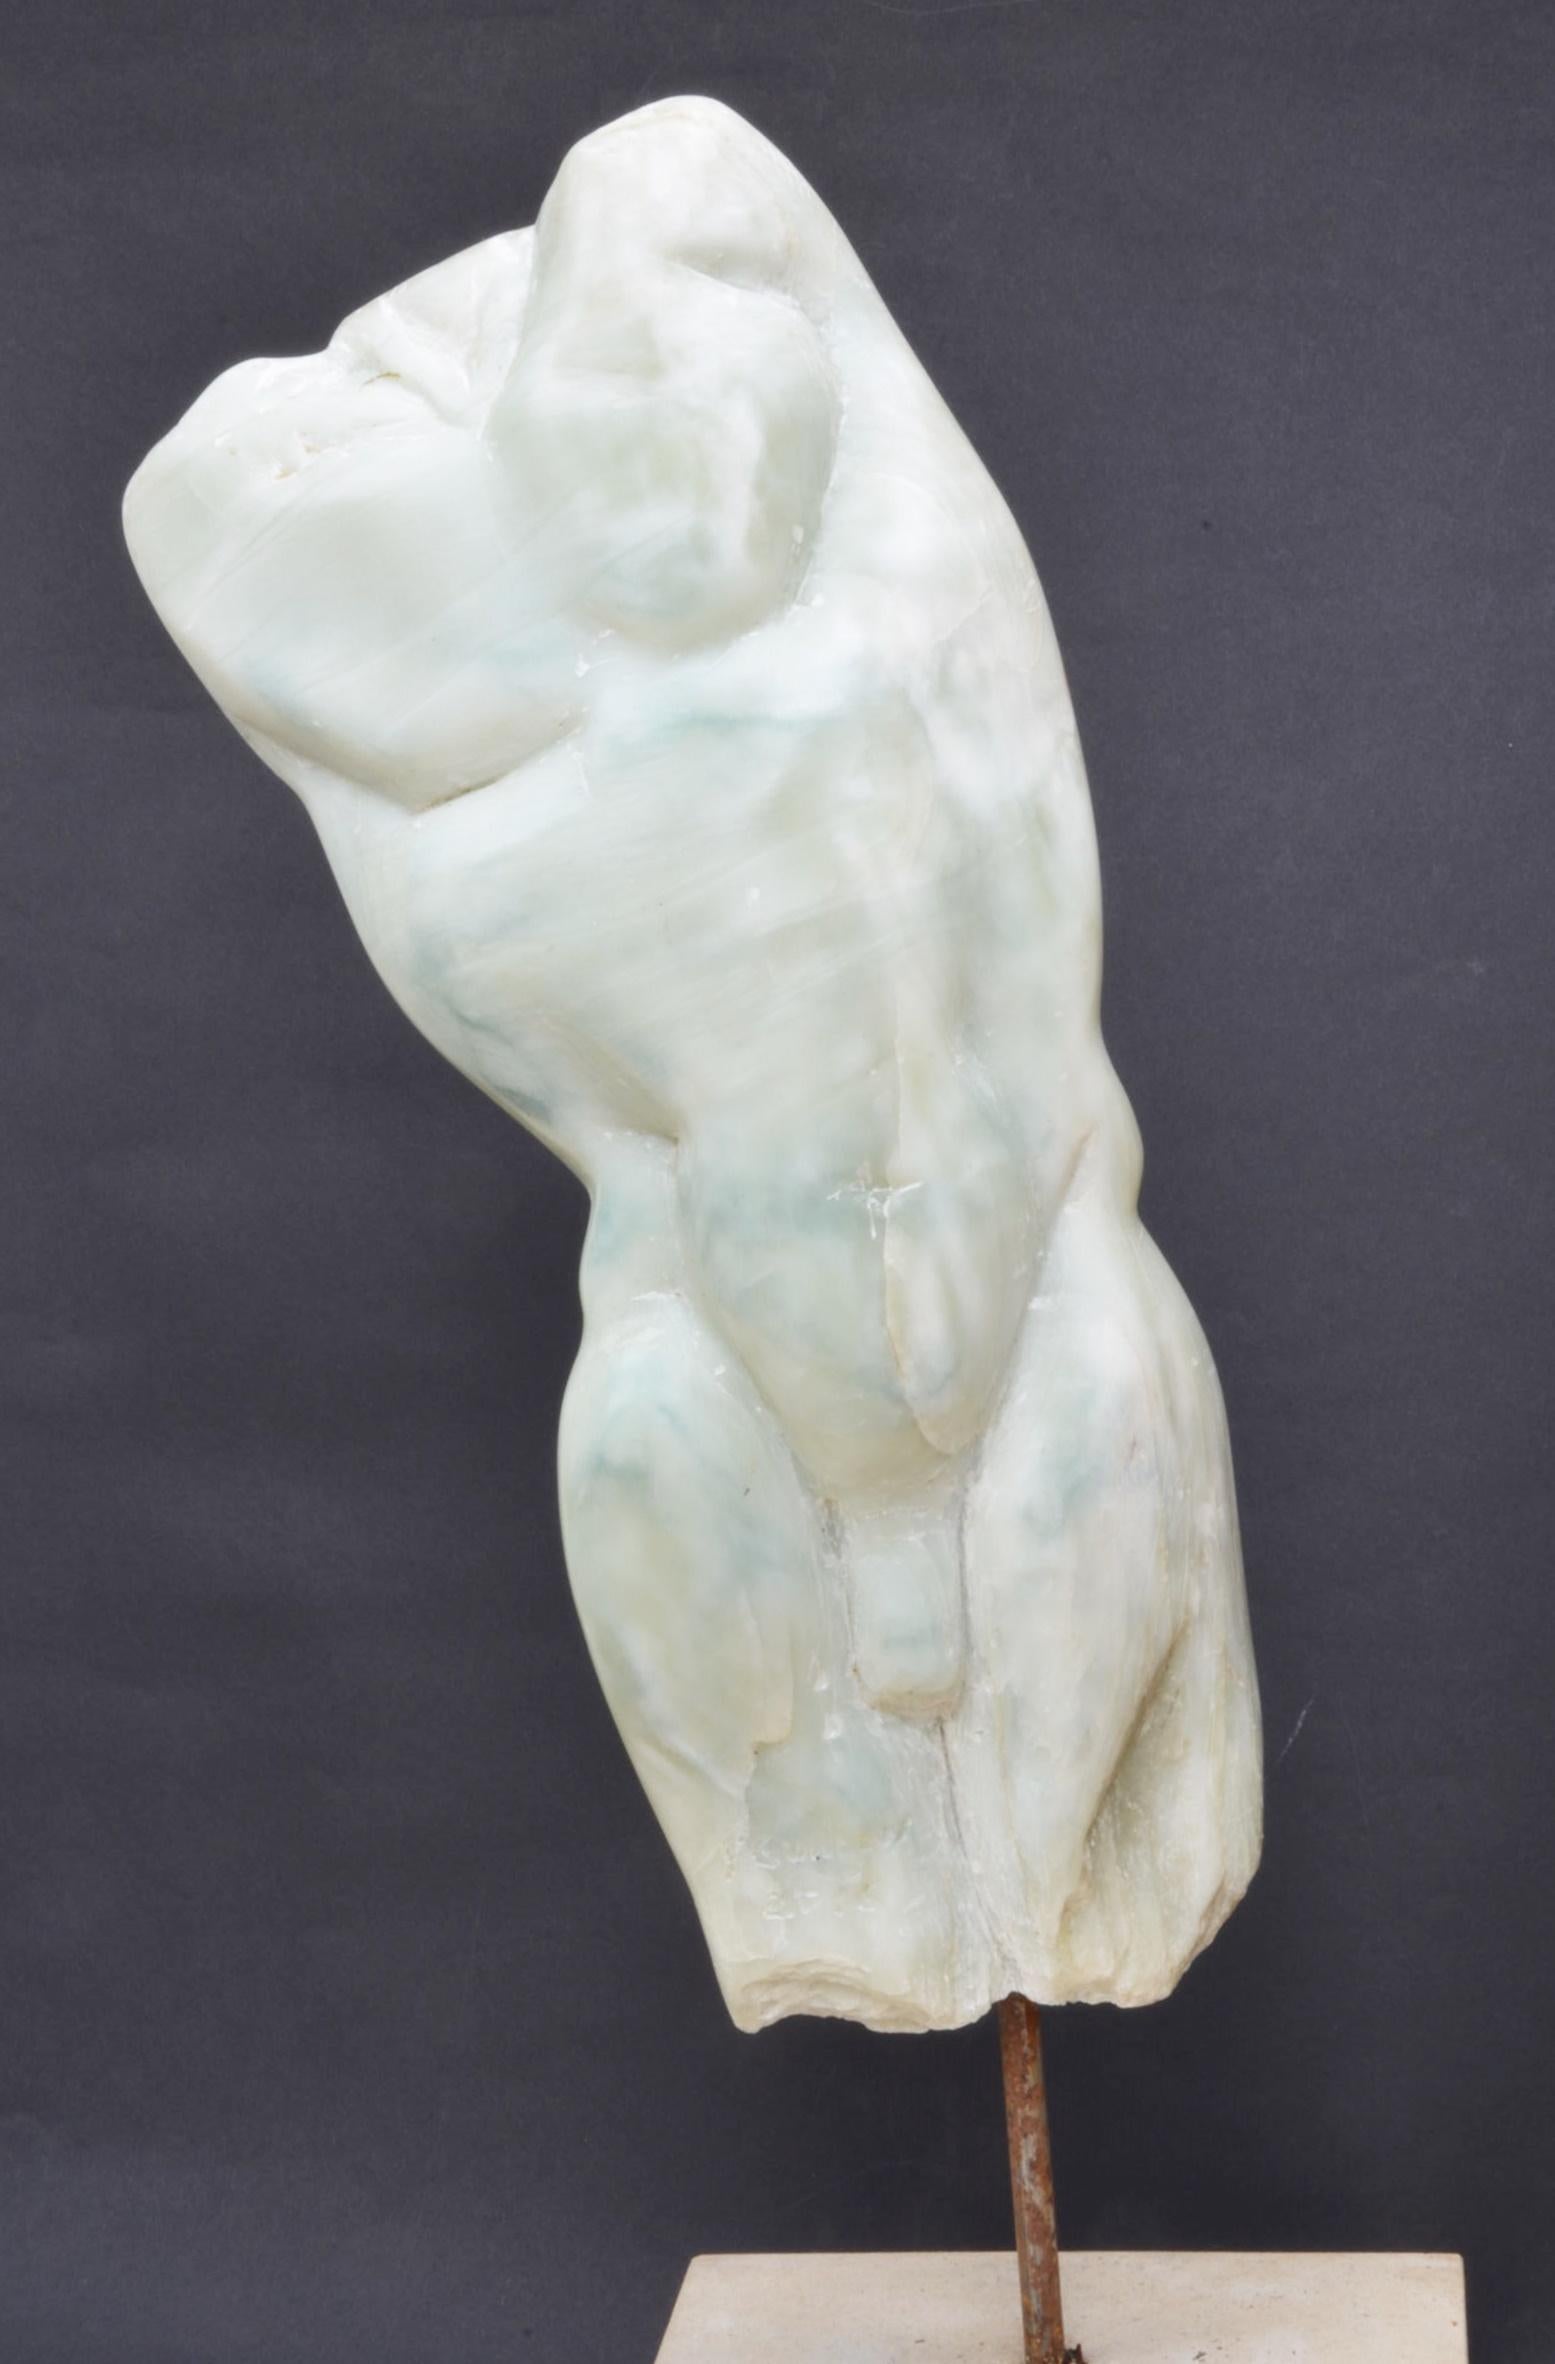 Man's Torso II is a stone sculpture by contemporary artist Yann Guillon, dimensions are 55 × 19 × 8 cm (21.7 × 7.5 × 3.1 in). Height of the sculpture with the metal base: 75 cm (29.5 in). The sculpture is signed and numbered, it is part of a limited